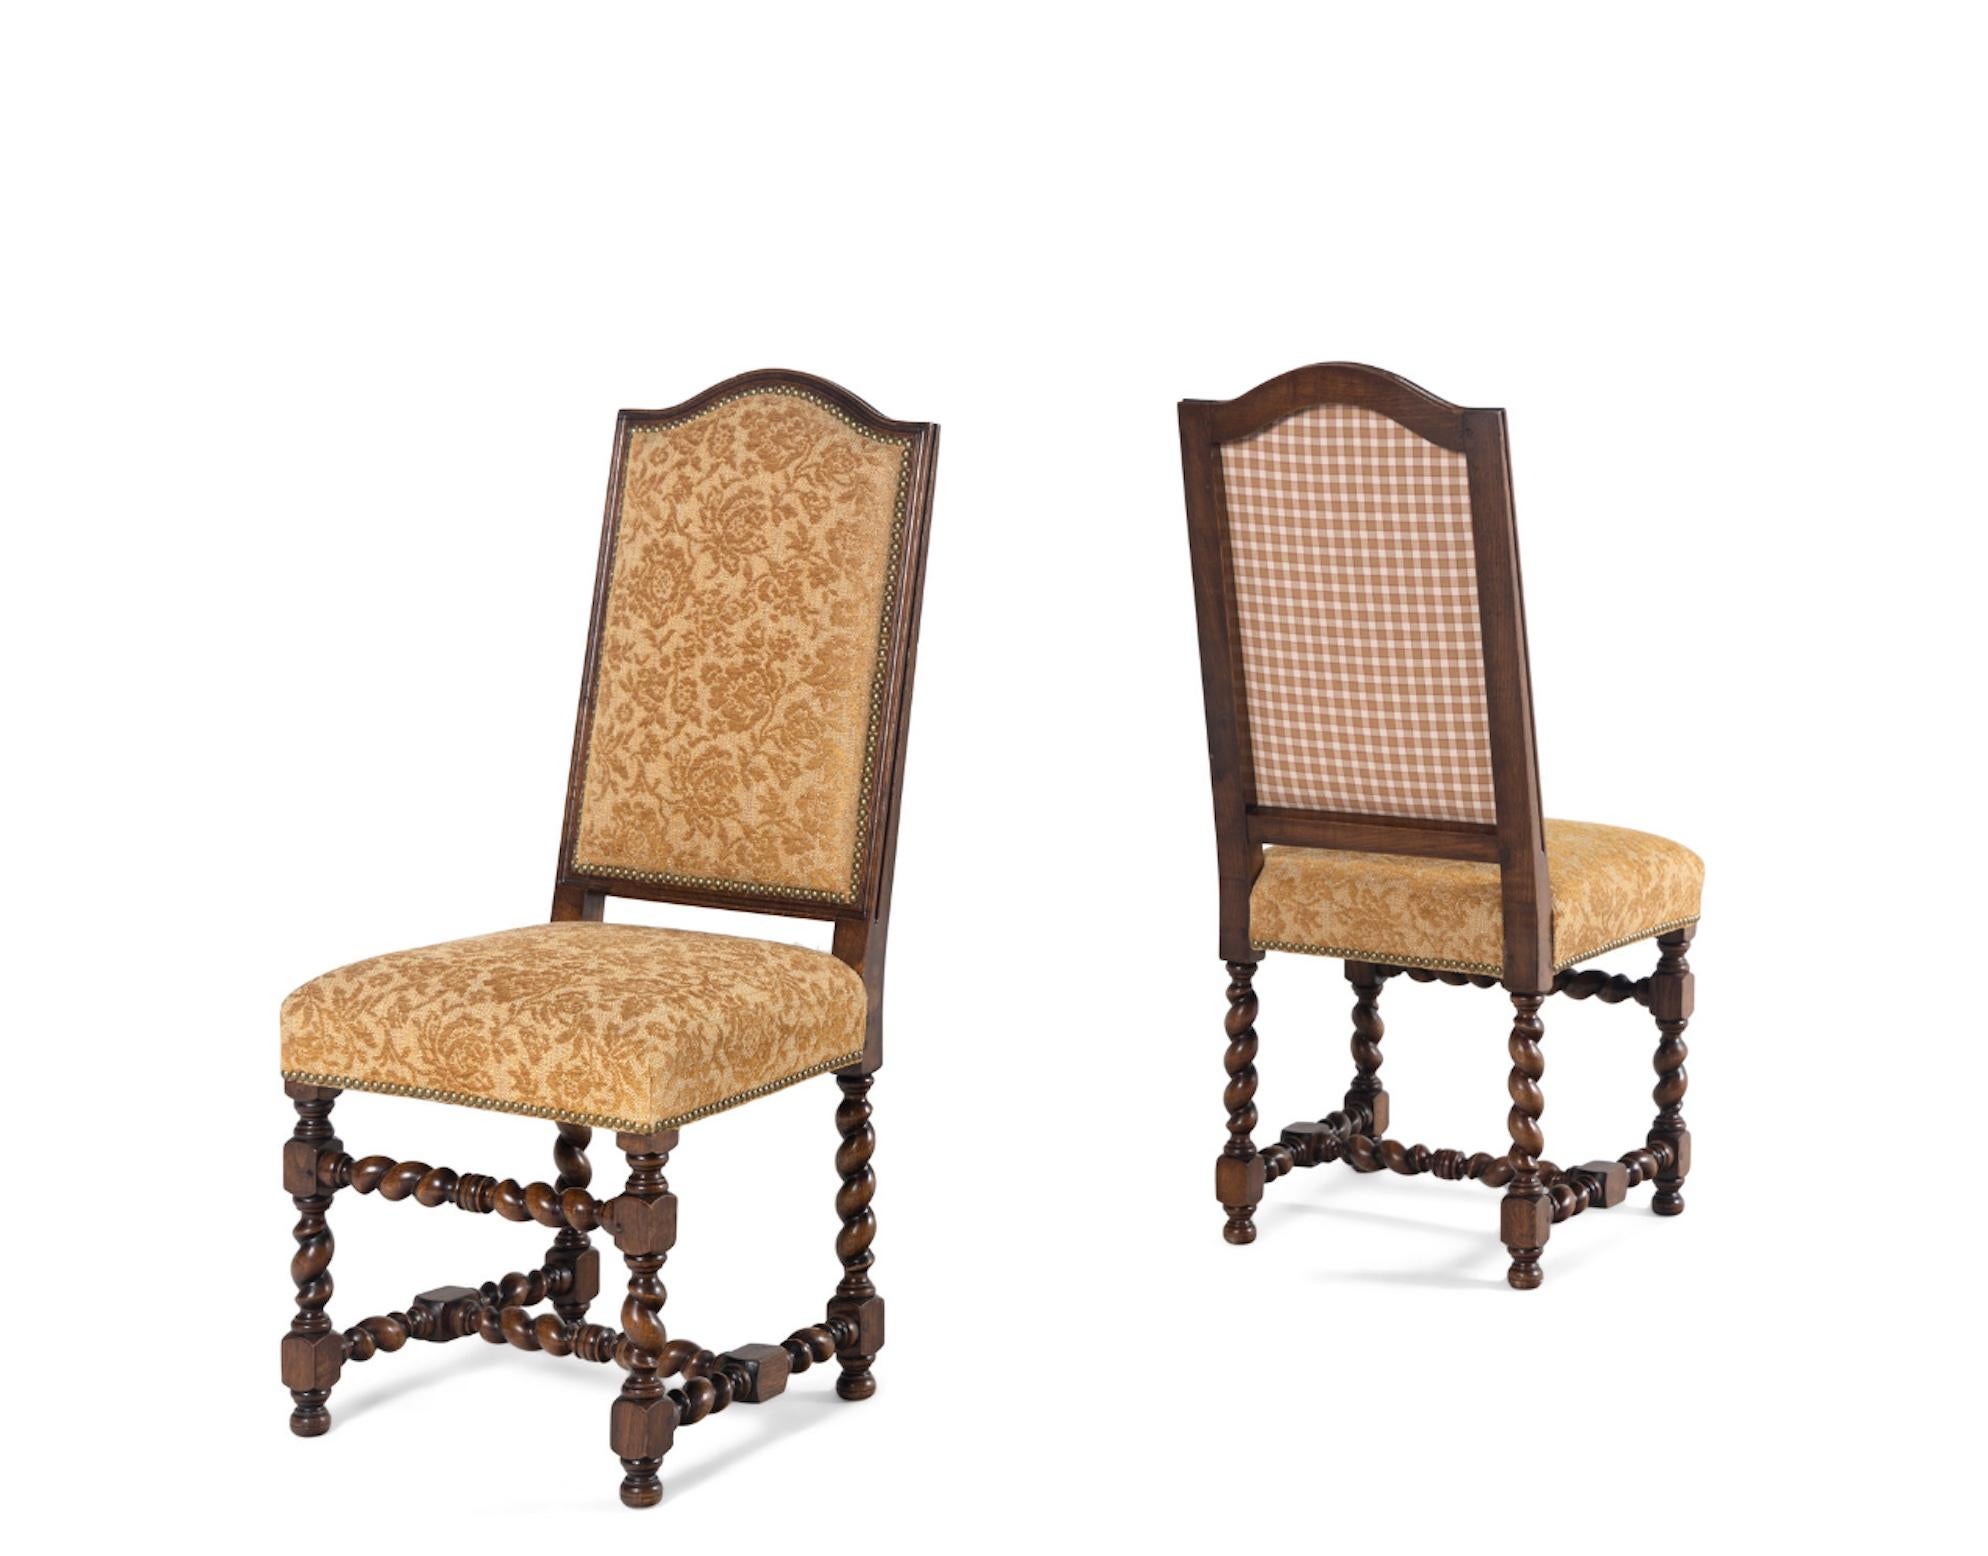 Eight Renaissance Style Brocade Dining Chairs, Great color and very comfortable.
20th Century
Height 43 x width 19 x depth 18 inches.